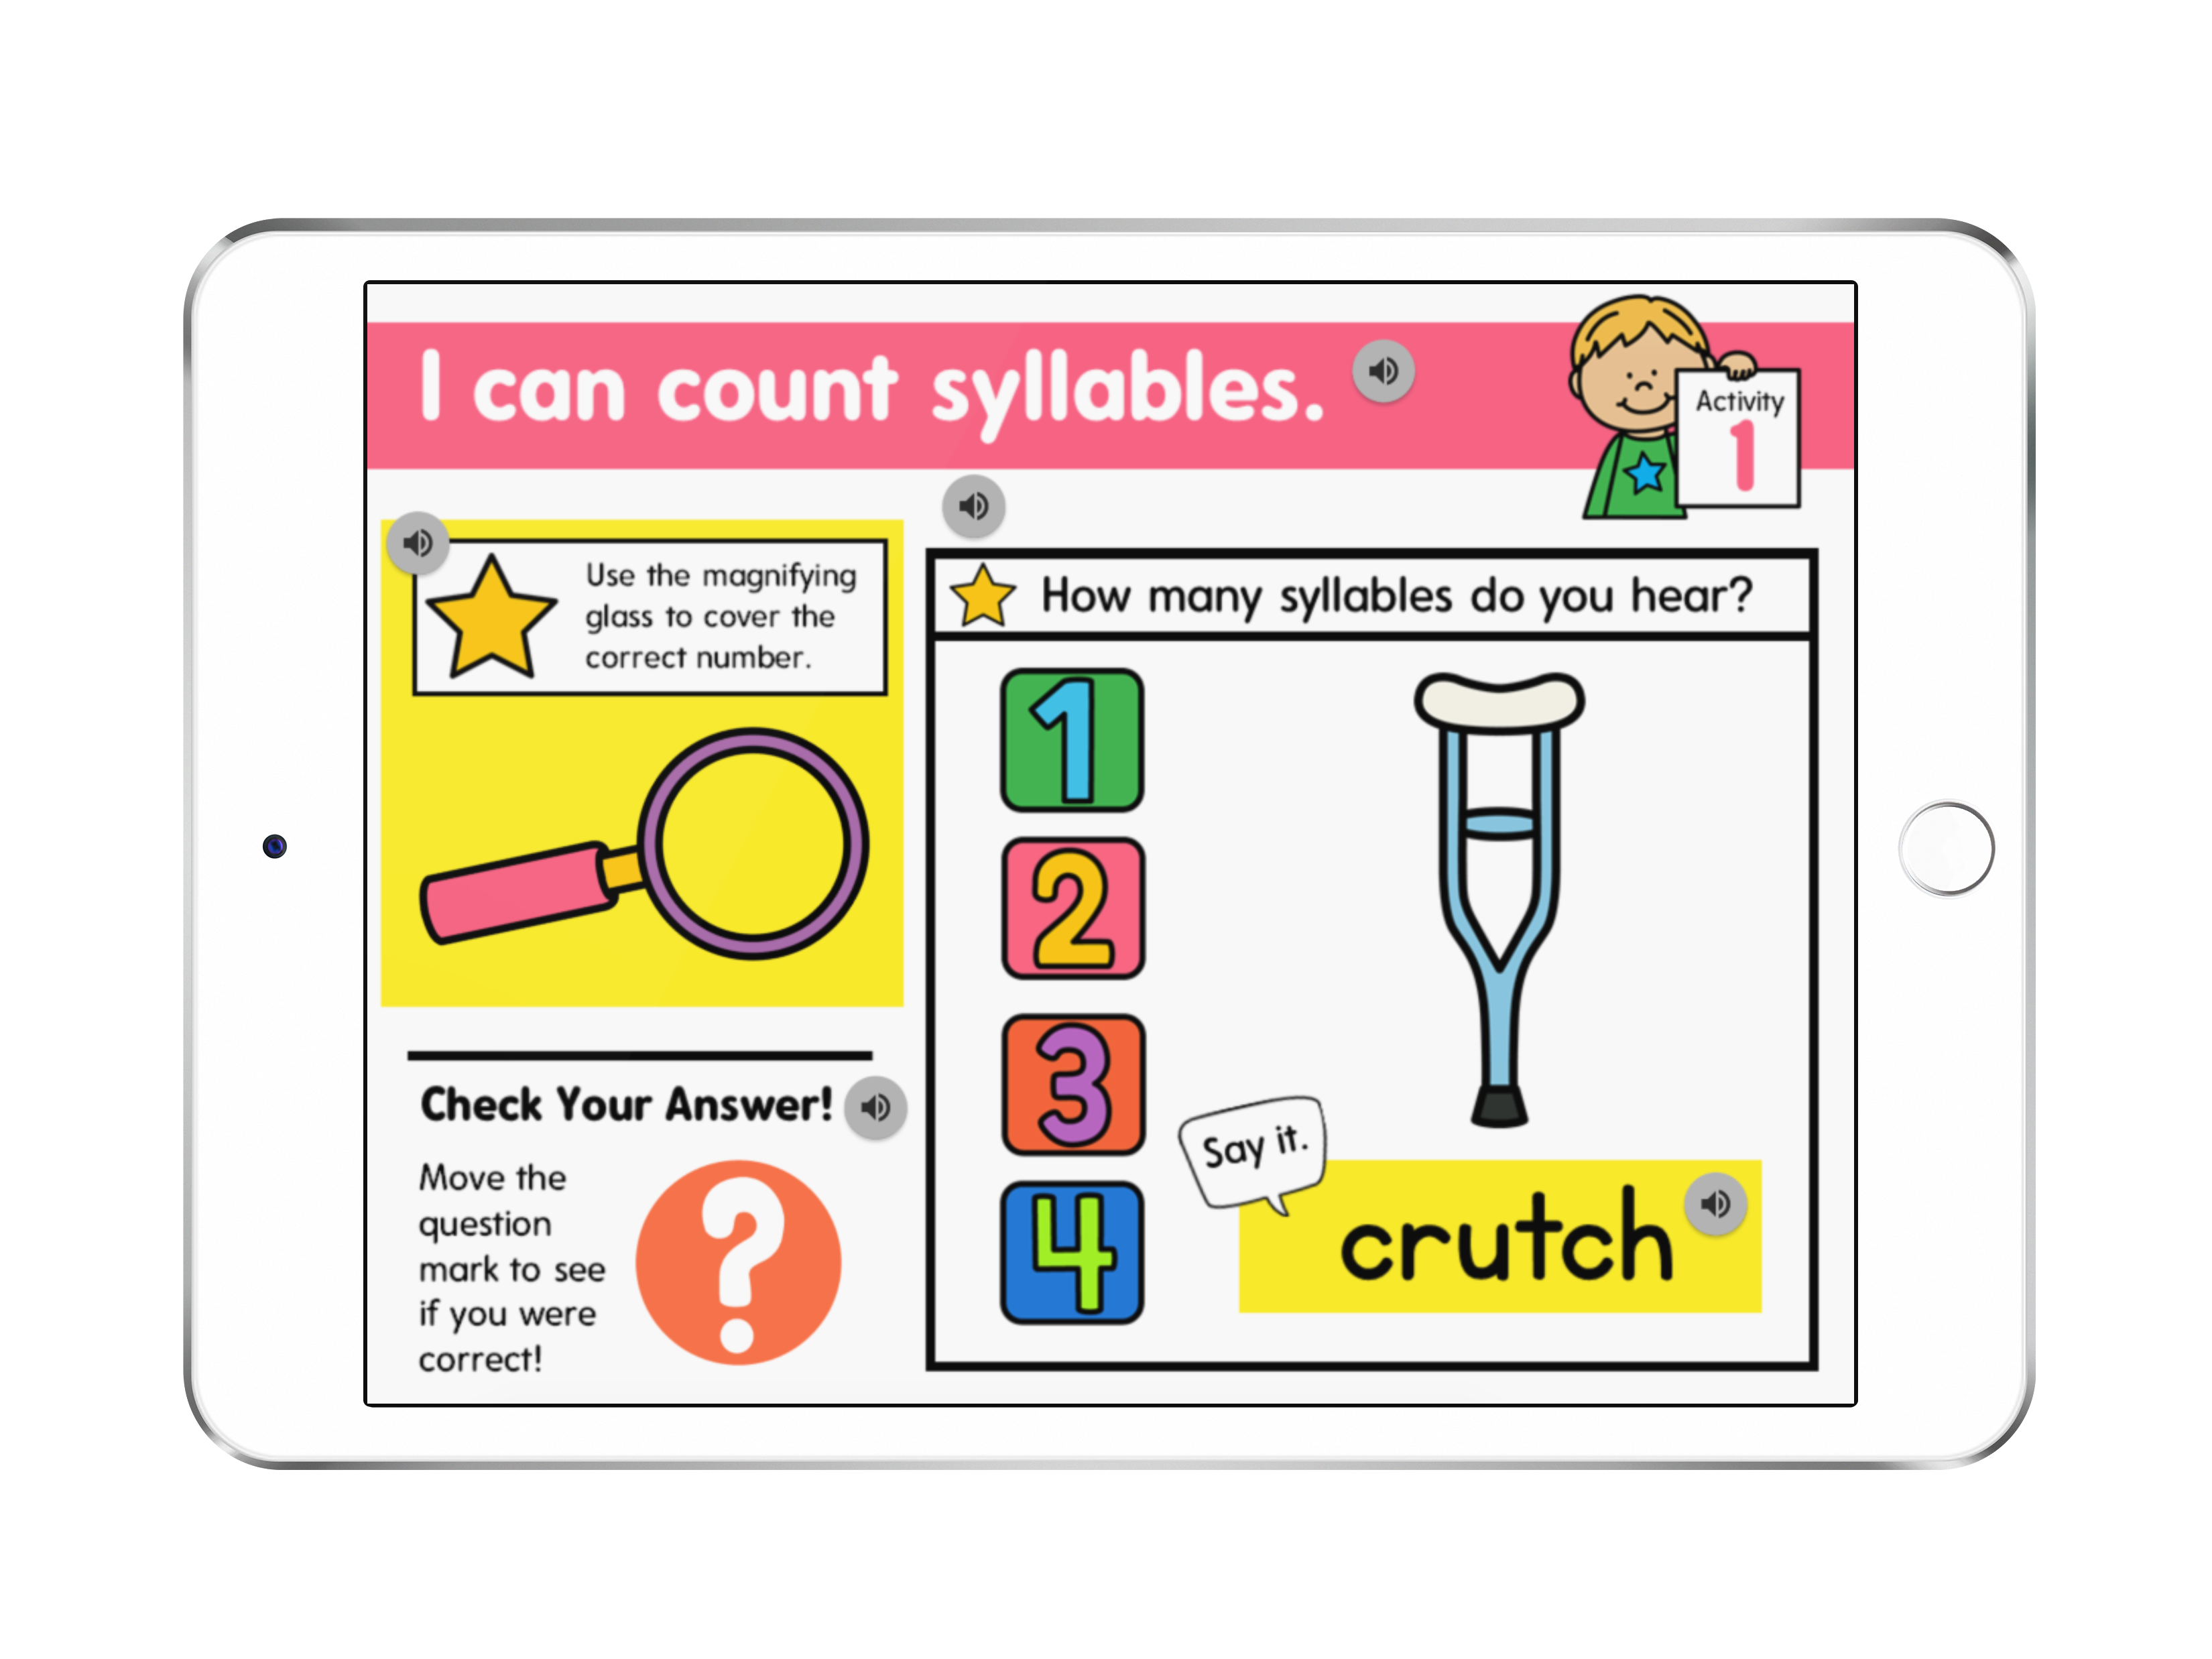 Counting syllables